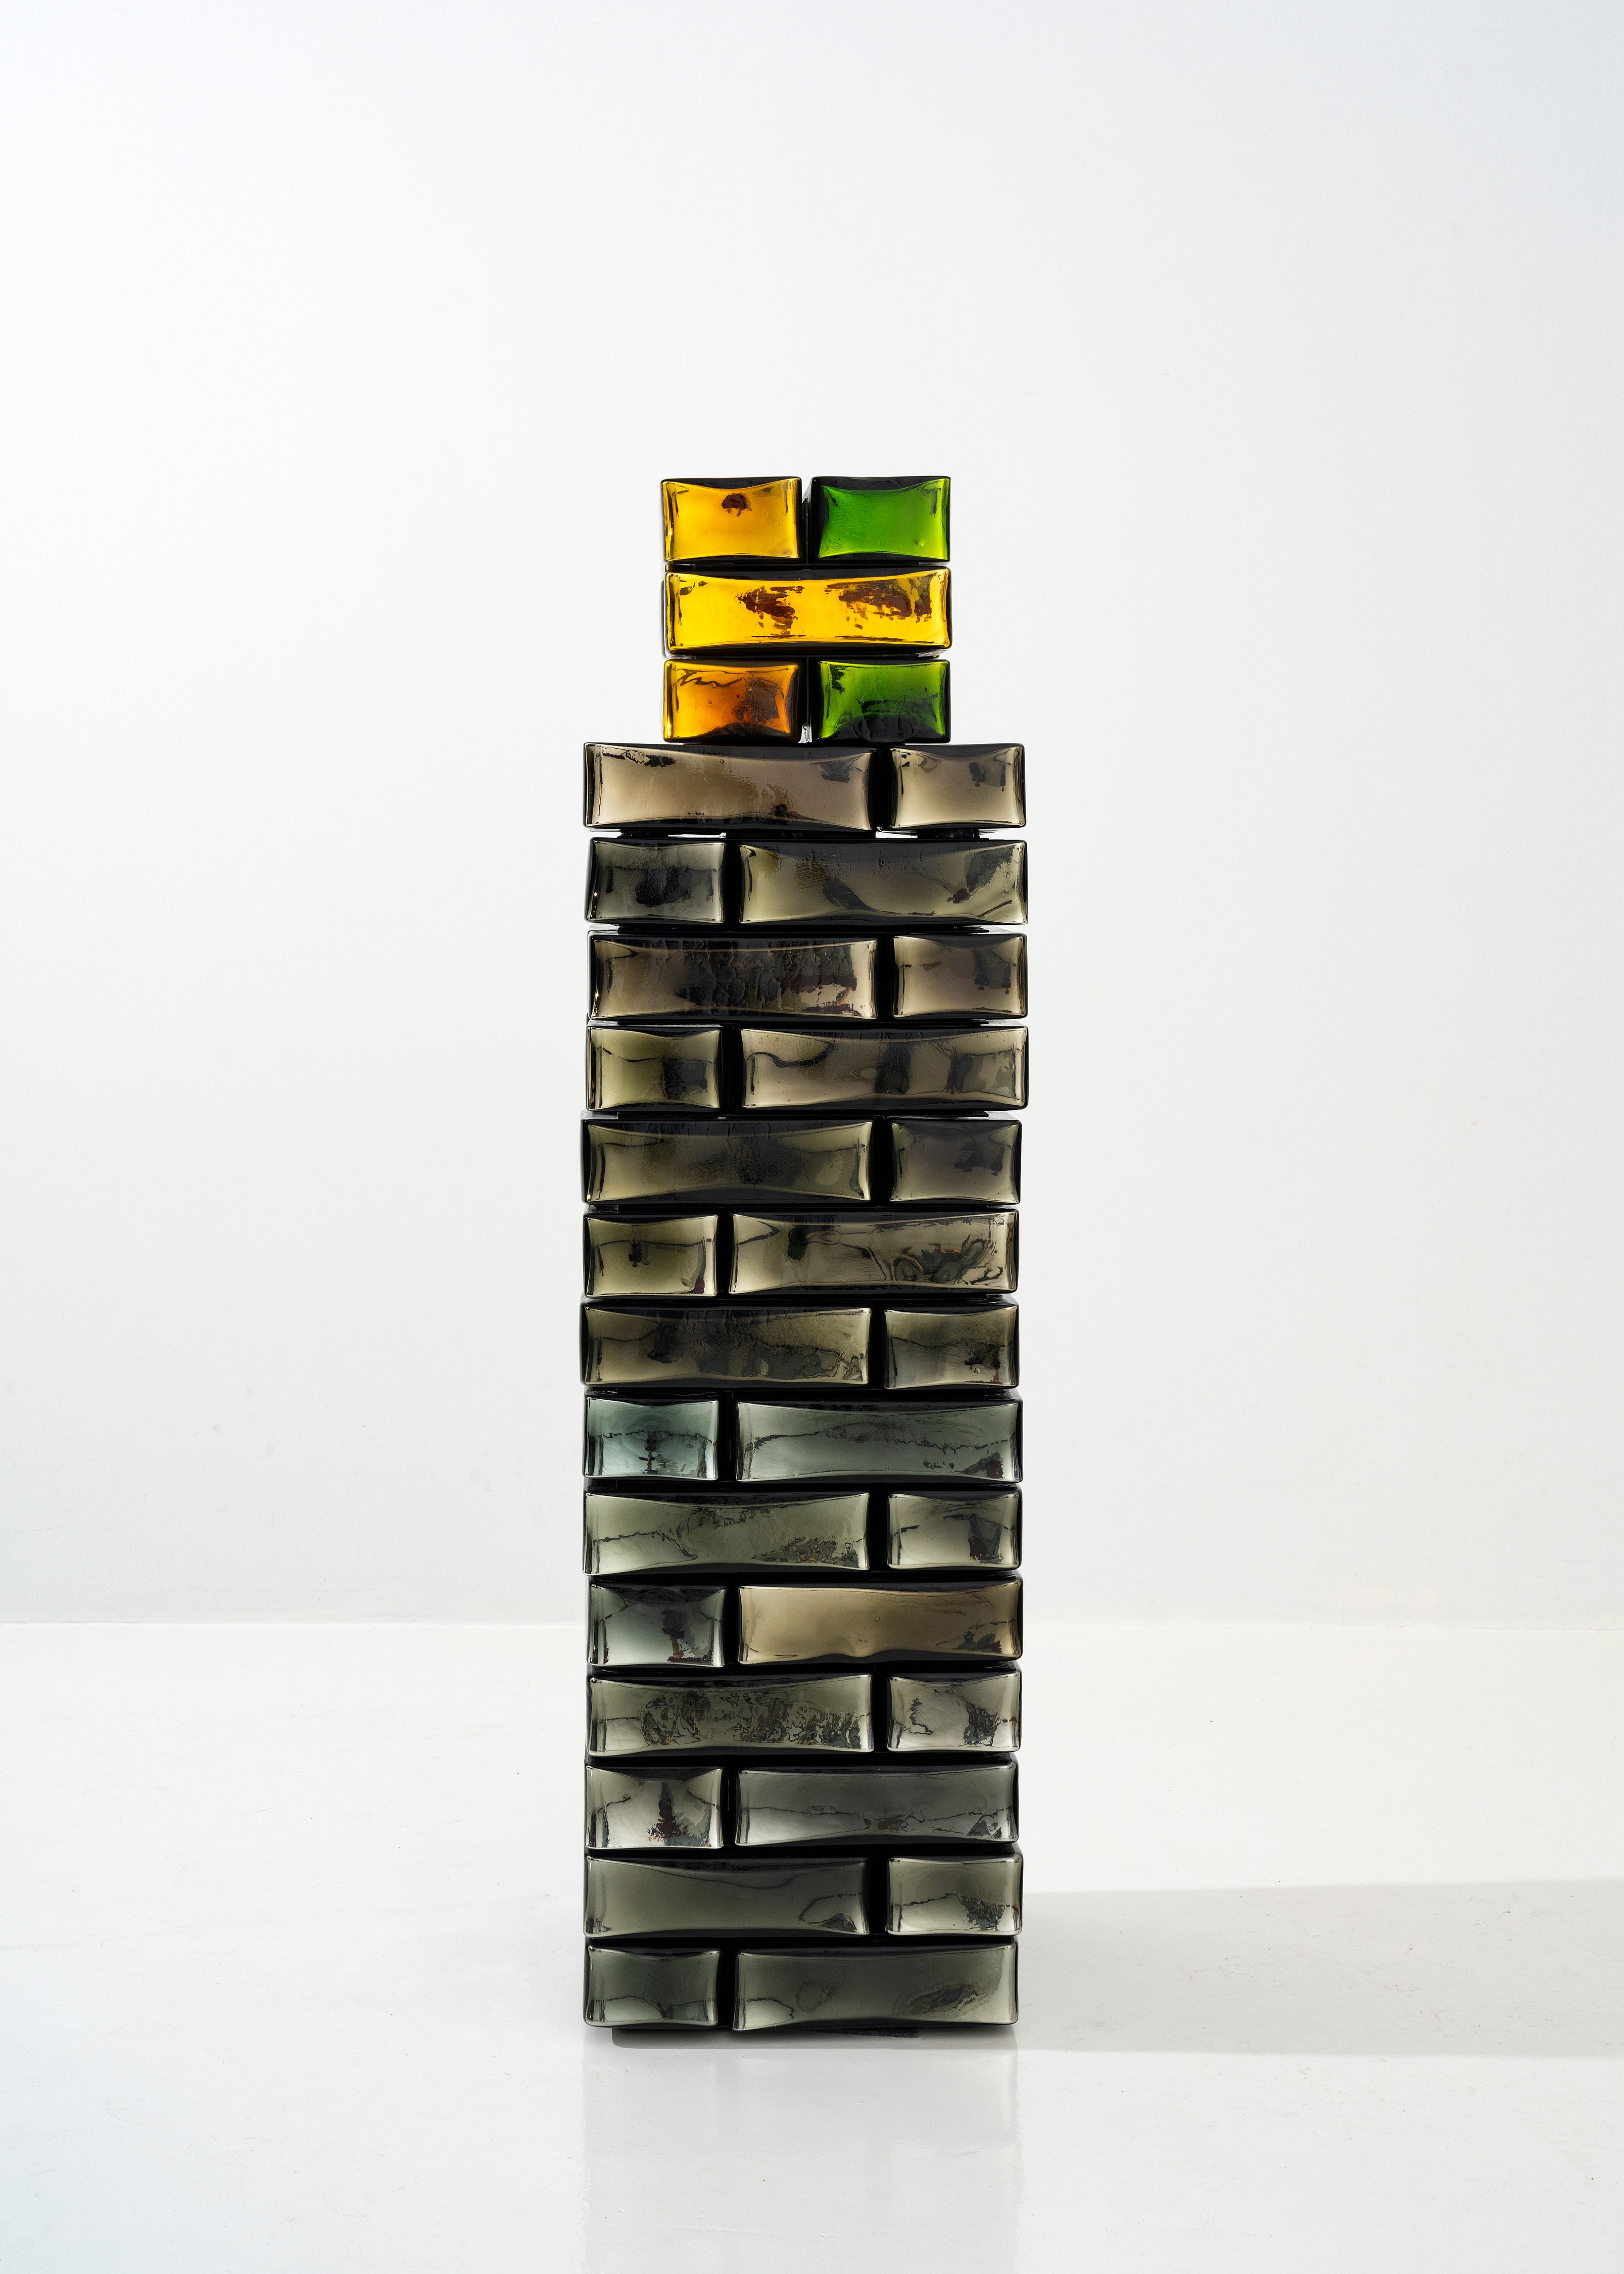 Perrotin 貝浩登 Jean-Michel OTHONIEL, “Wonder Block”, 2023, Amber and green Indian mirrored glass, stainless steel, 120x33x33 cm. Image courtesy of Perrotin.